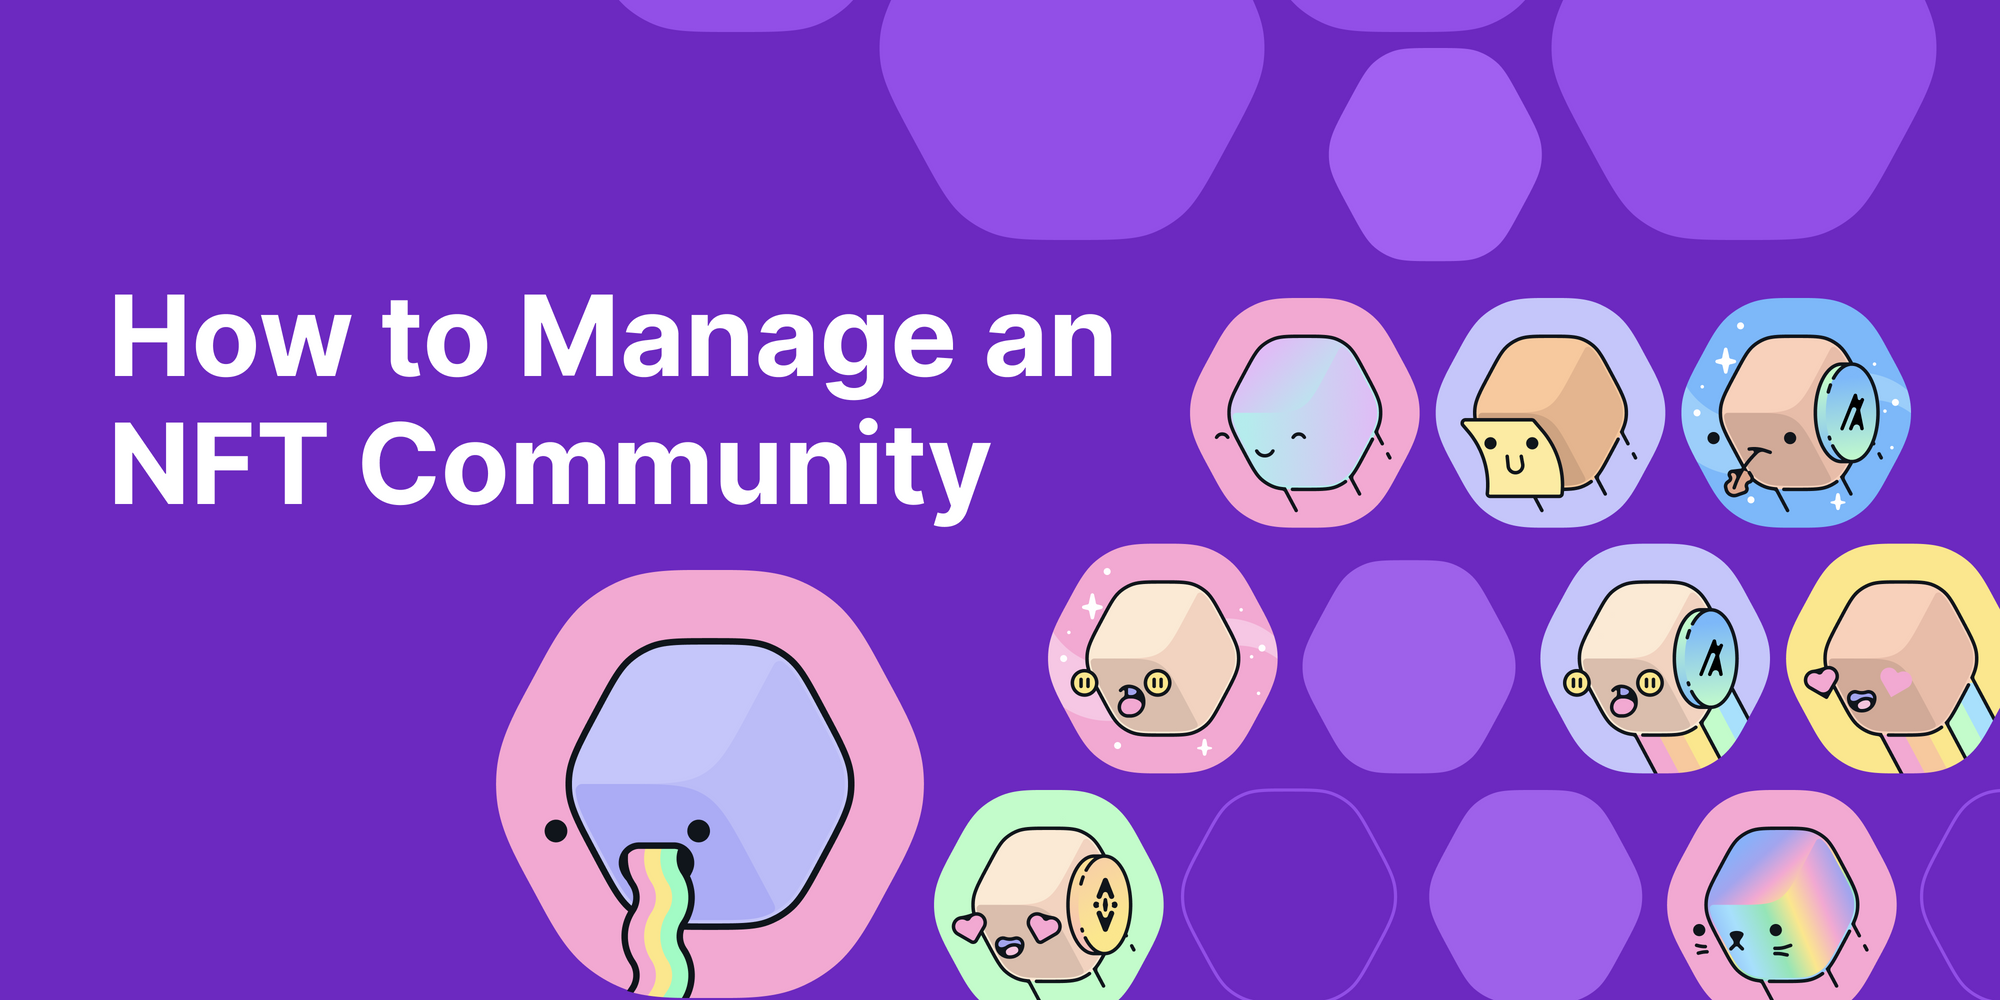 How to Manage an NFT Community